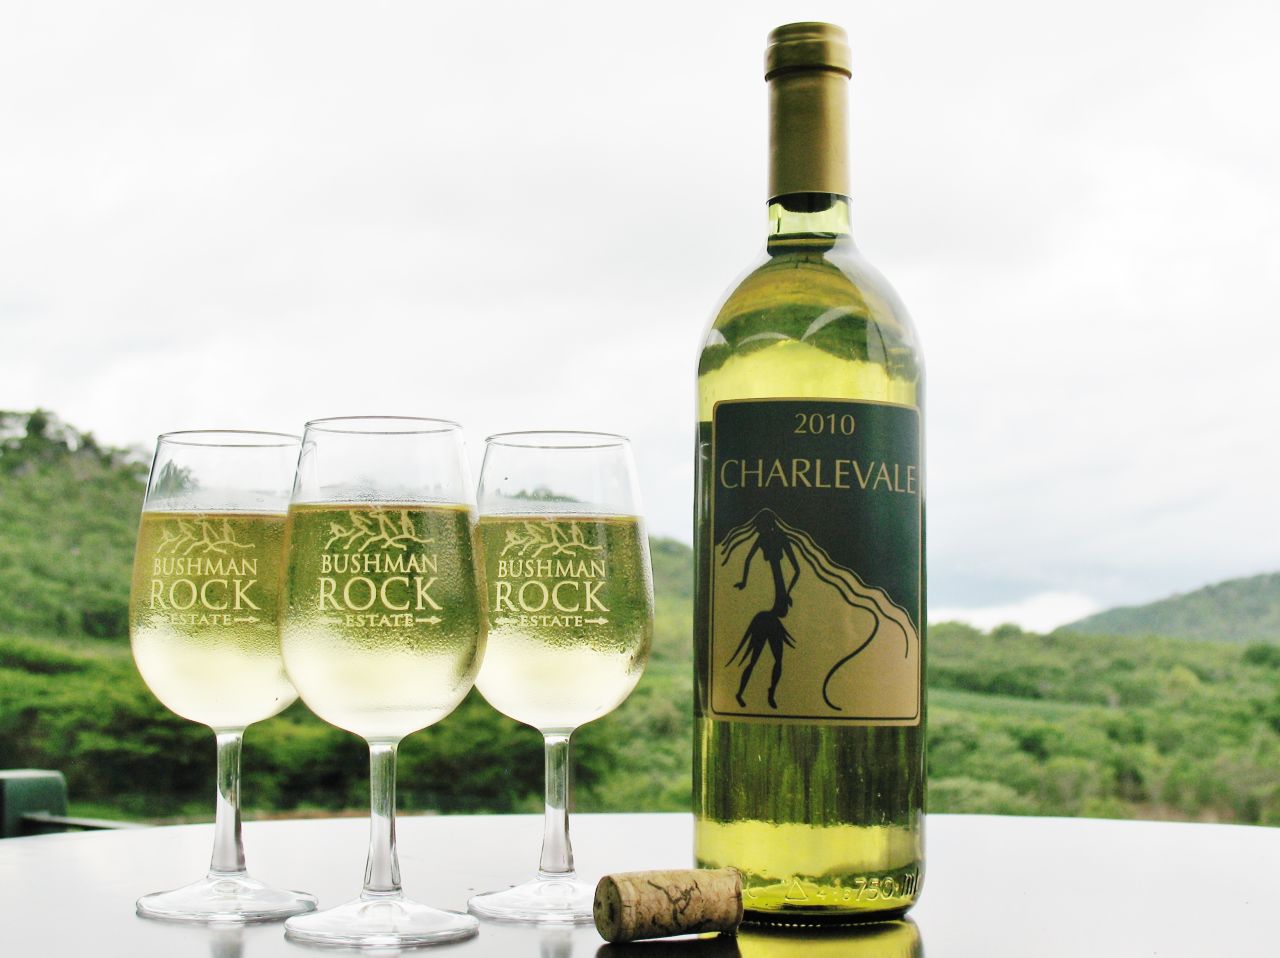 Zimbabwe's Charlevale: With a cut-grass character and light oak flavor, this refreshing wine is aged for up to five years.